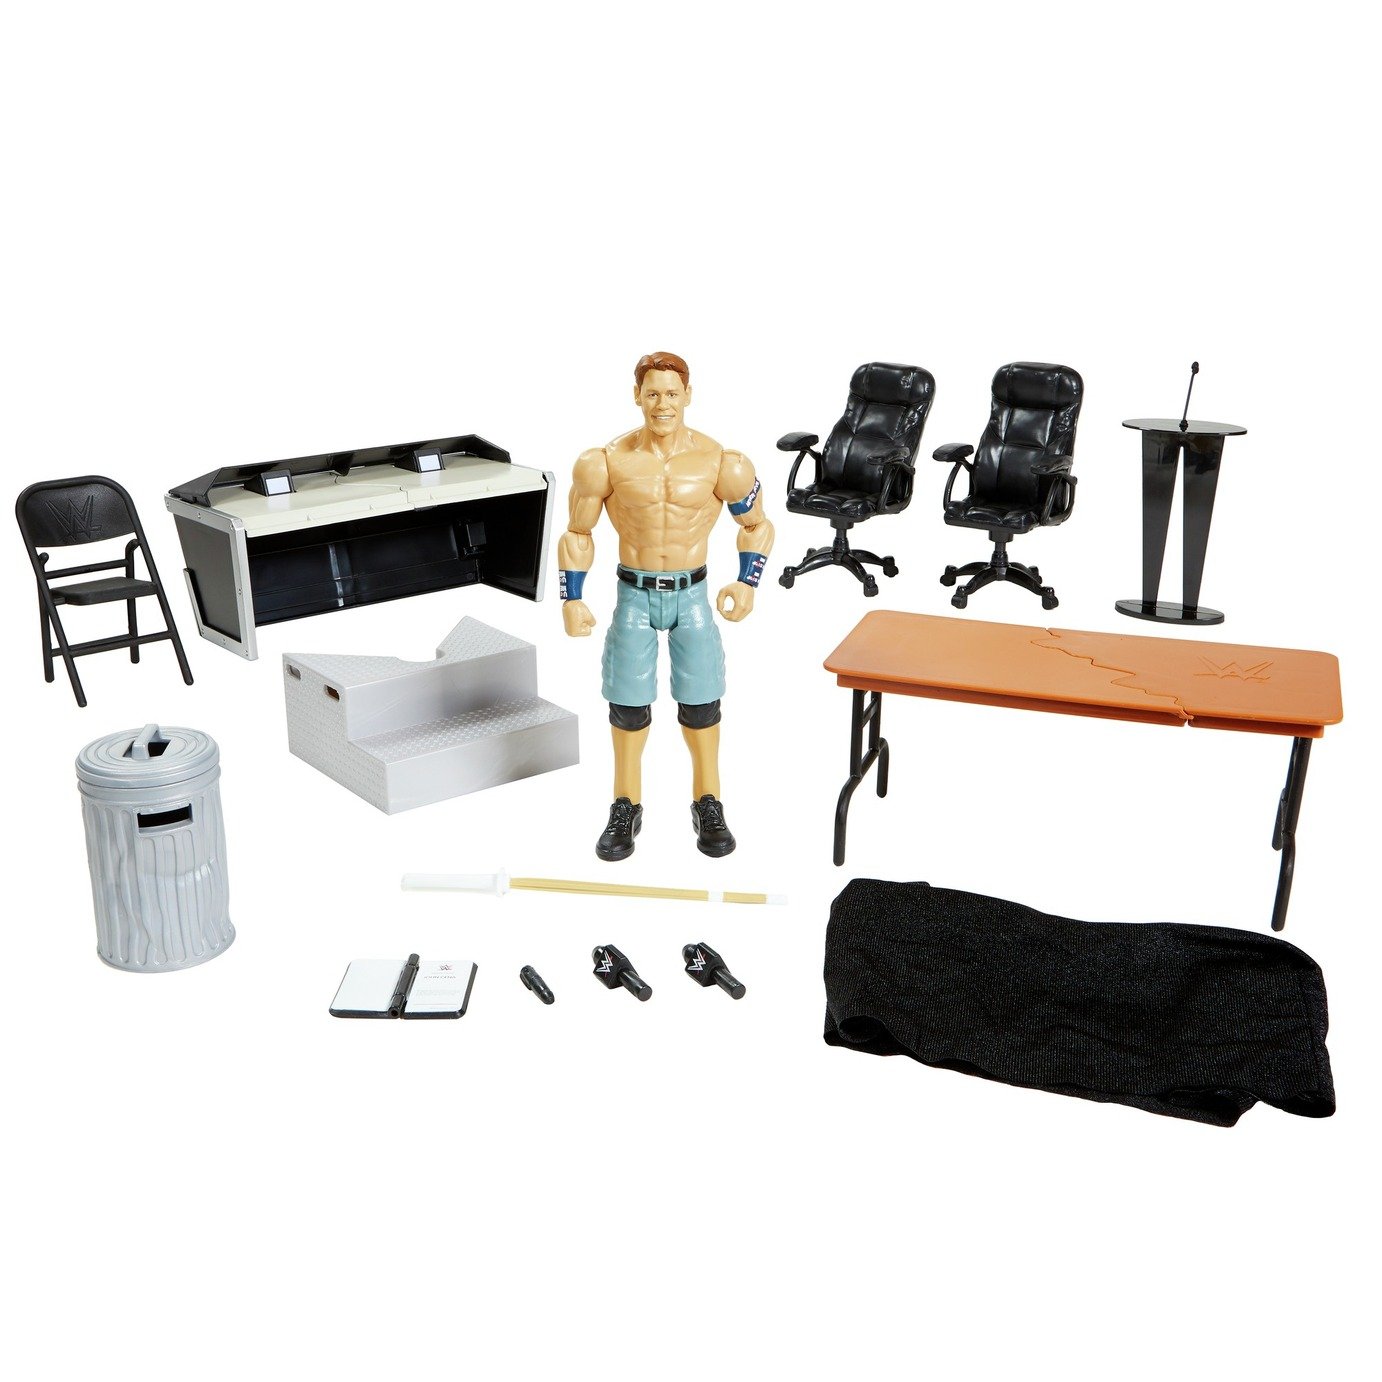 WWE Contract Chaos Playset Review